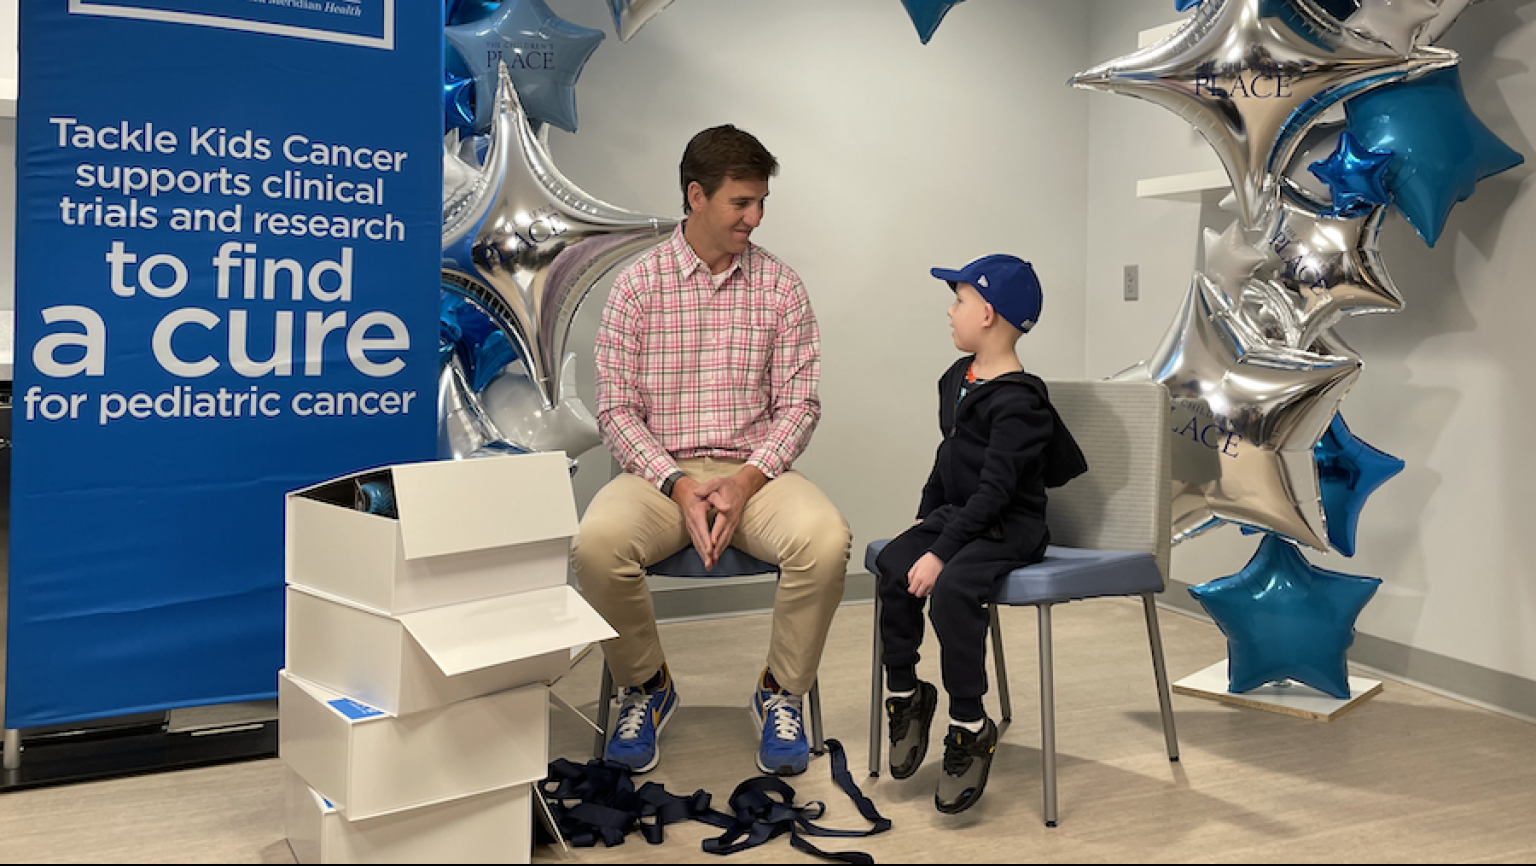 Eli Manning Teams Up with The Children's Place to Tackle Kids Cancer